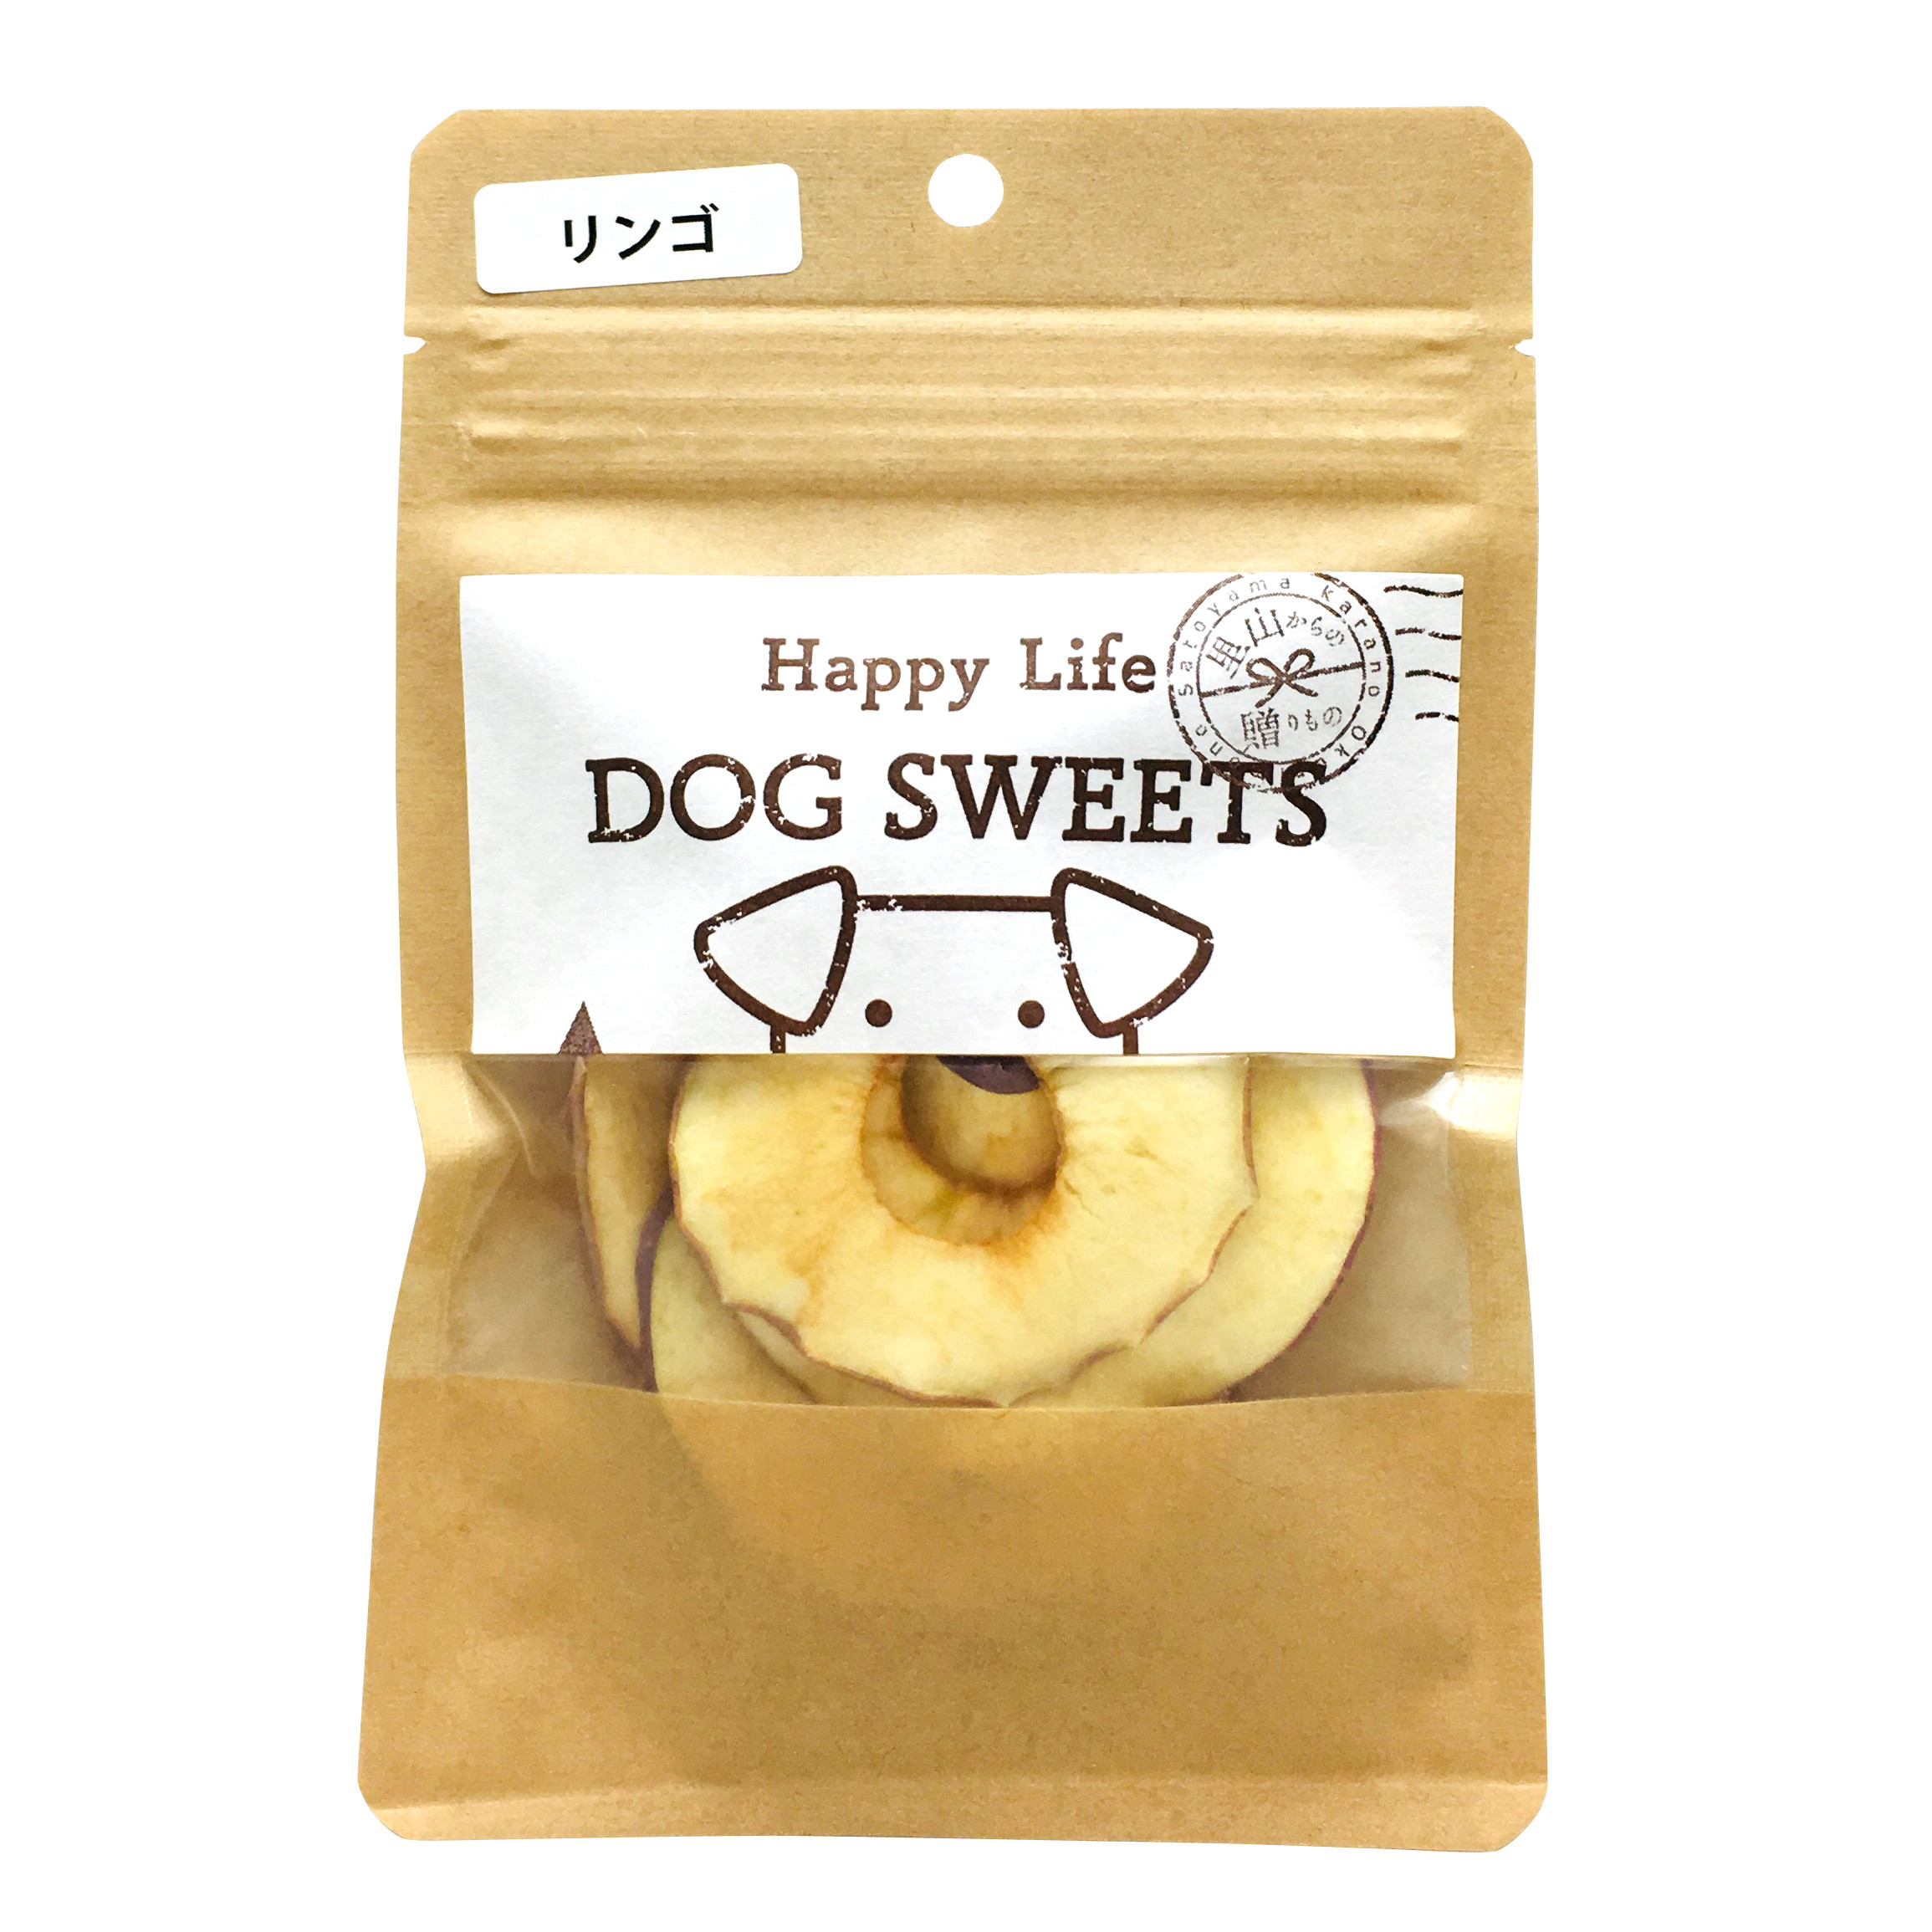 P2 DOG SWEETS リンゴ 10g